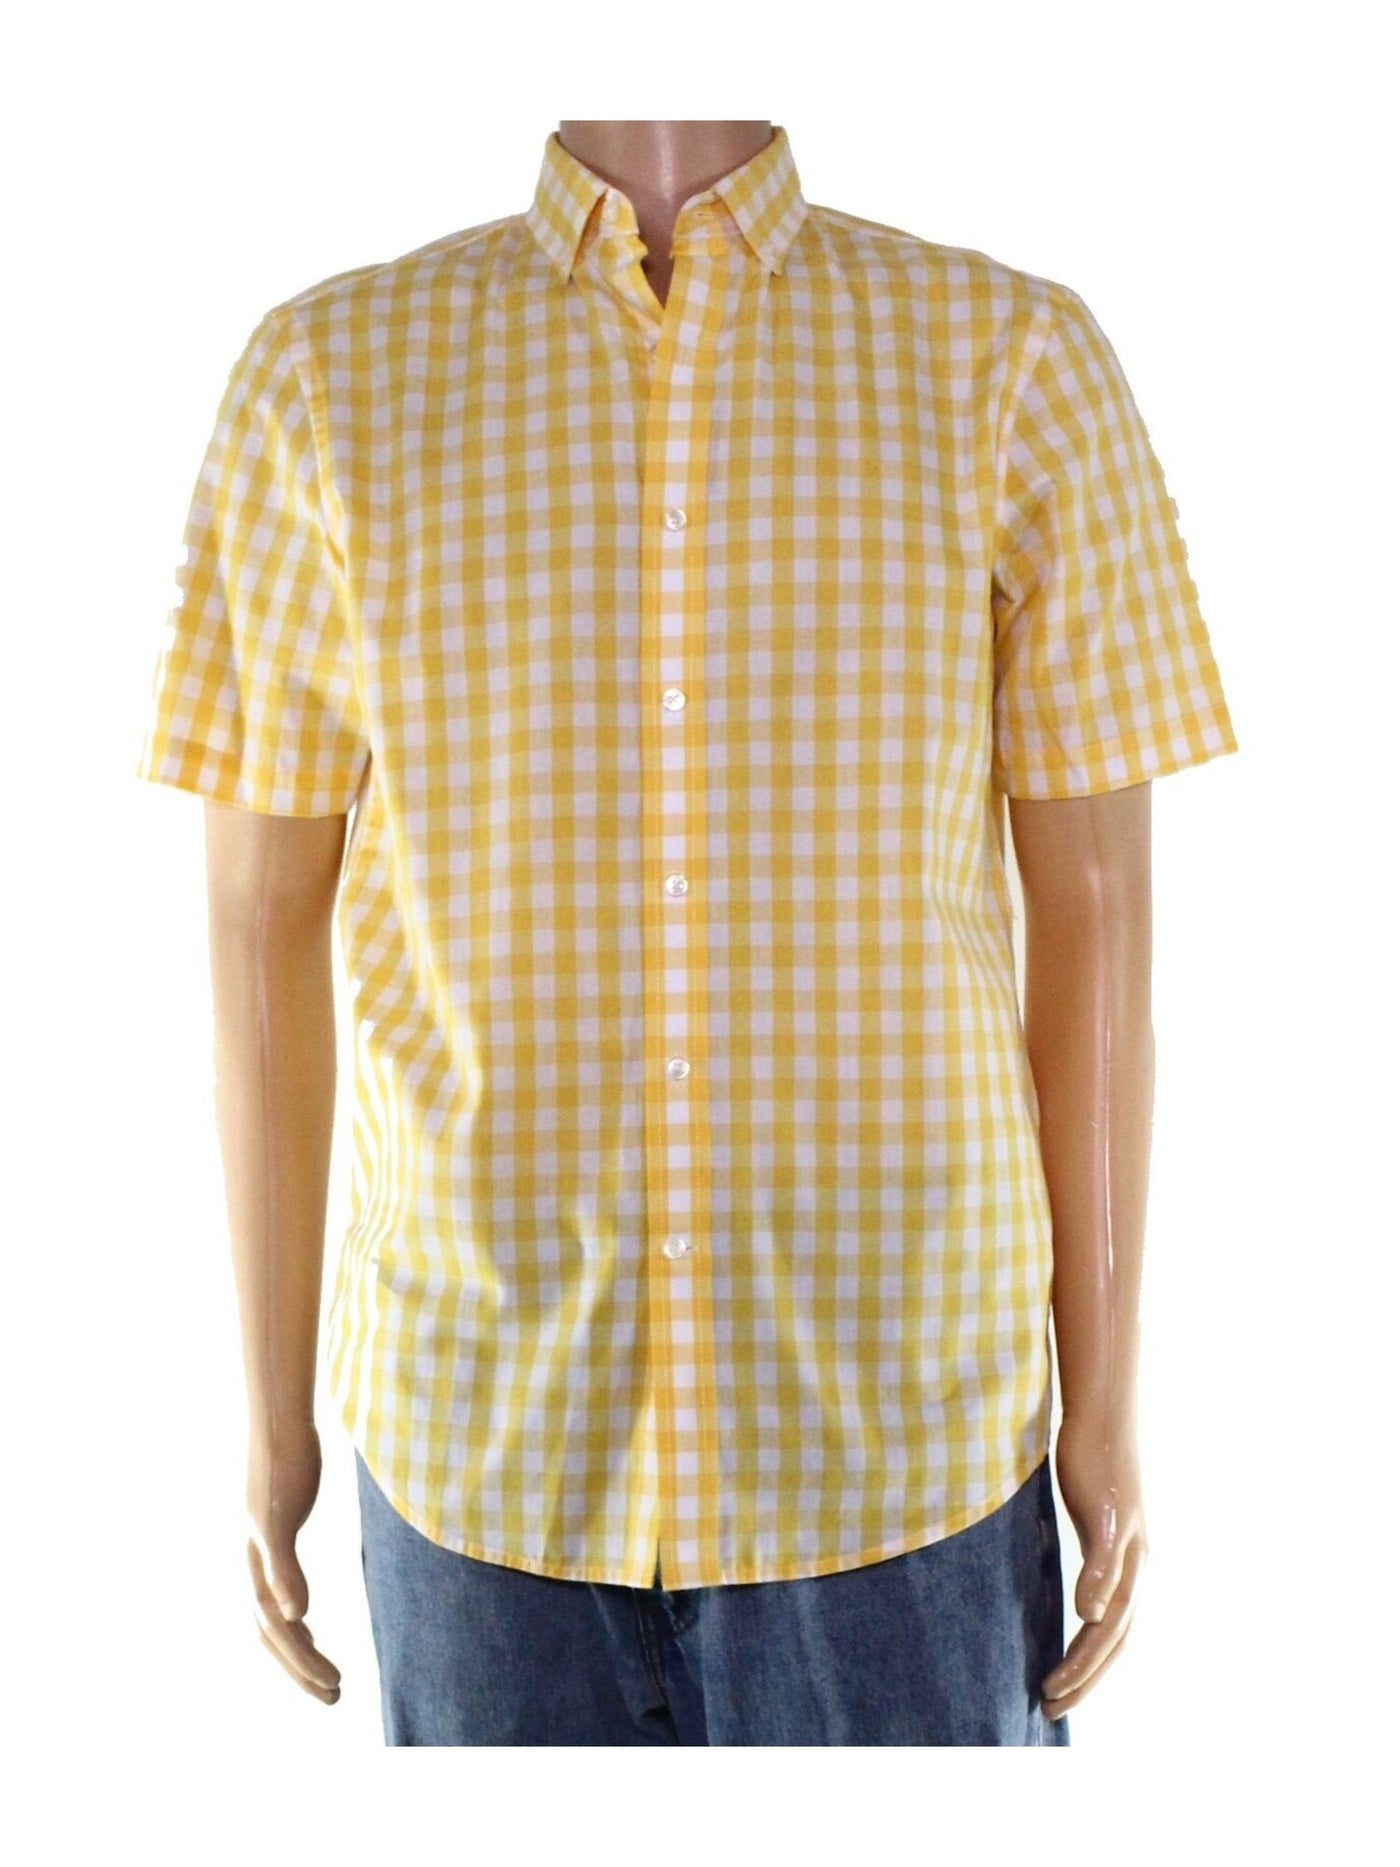 CLUBROOM Mens Yellow Multi-Check Collared Classic Fit Dress Shirt M